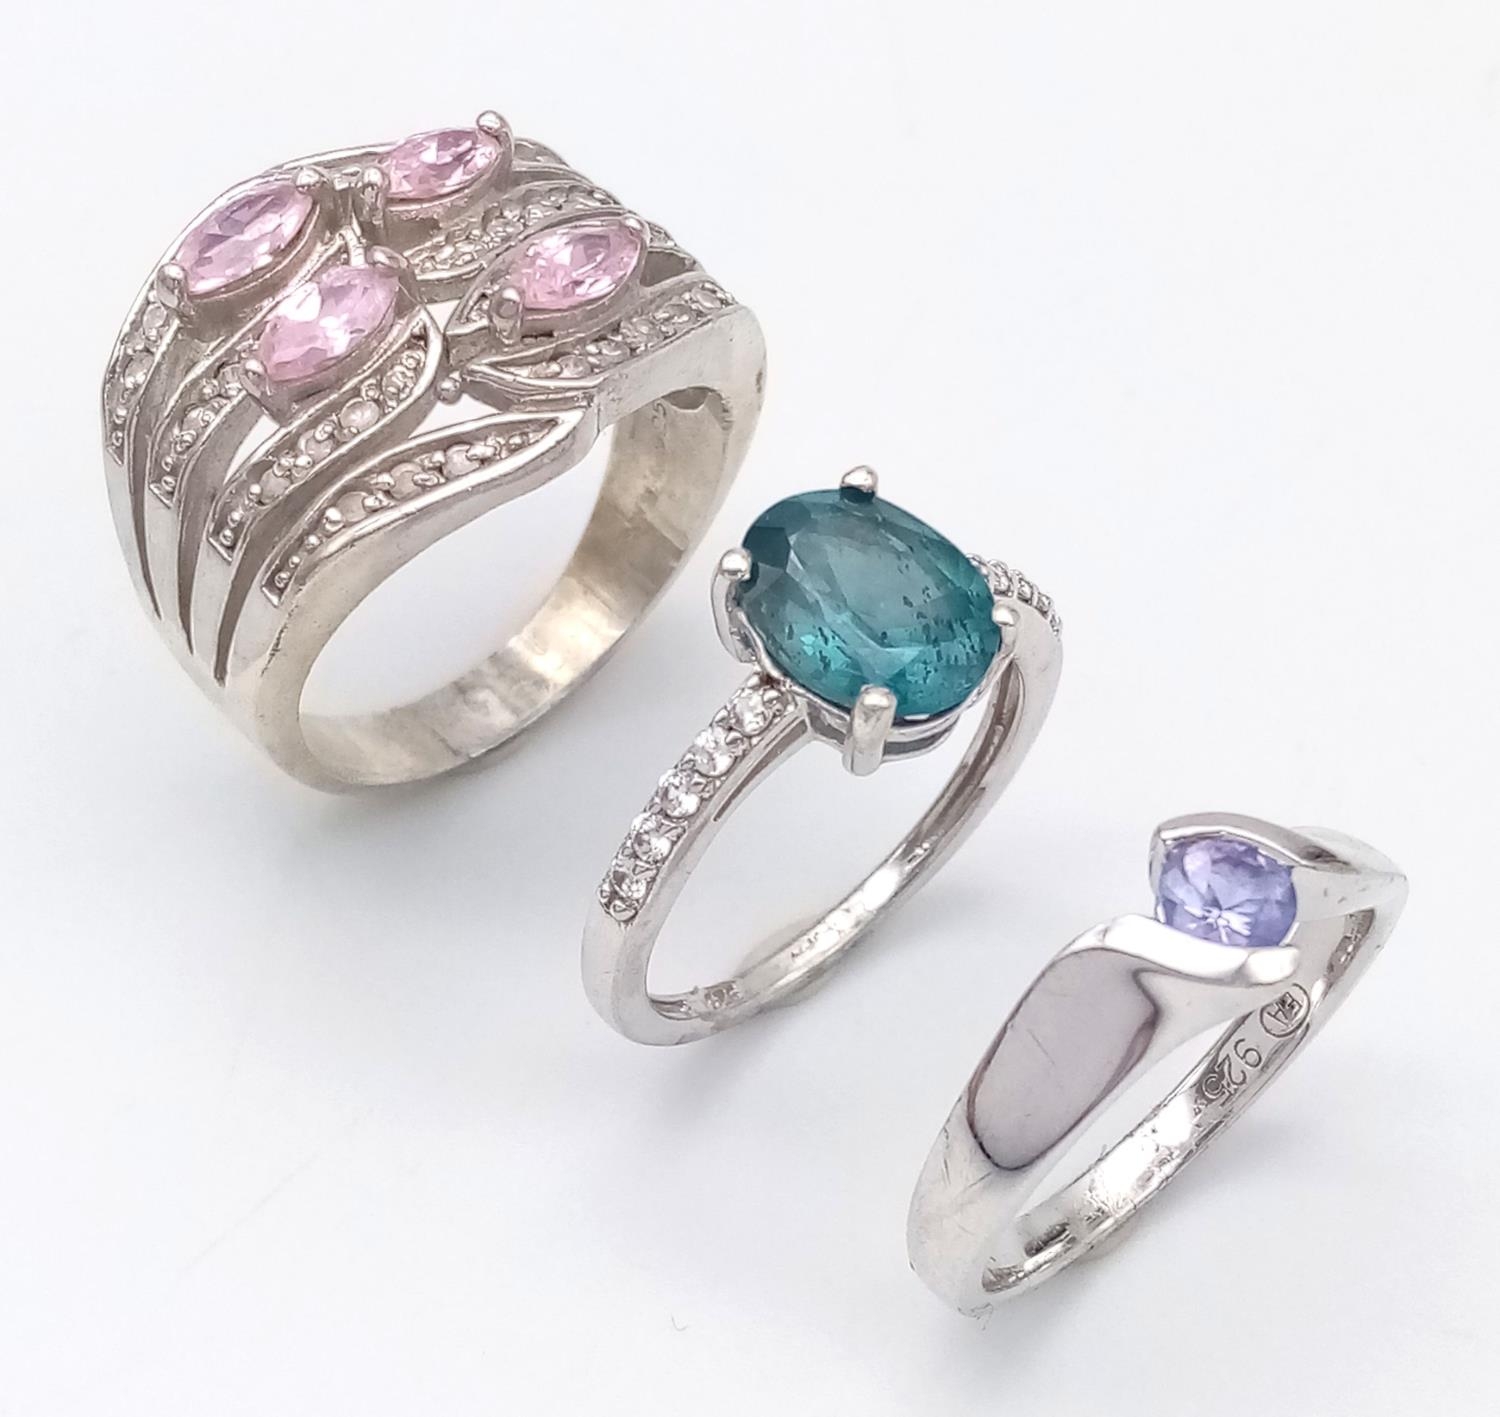 Three 925 Silver Different Style Stone Set Rings. Sizes: 2 X L, 1 x R.